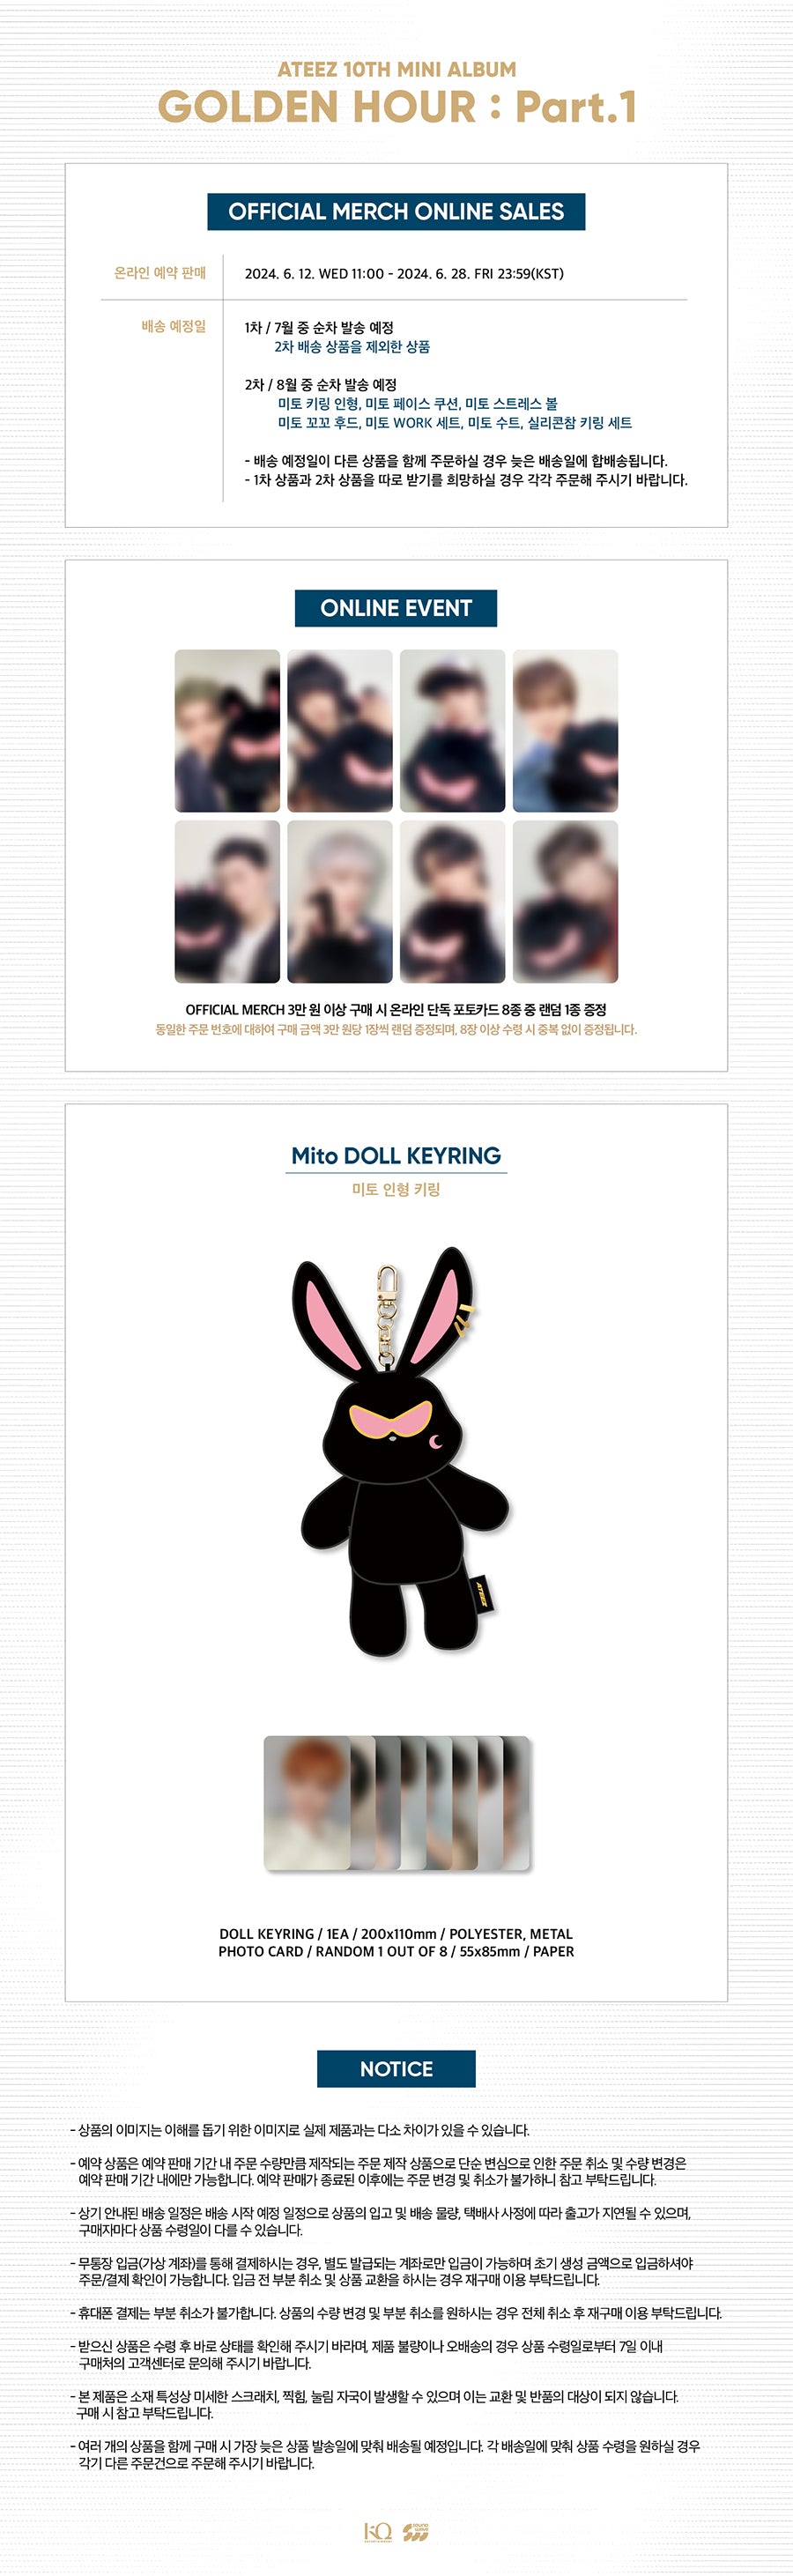 [PRE-ORDER] ATEEZ - Mito Doll Keyring [GOLDEN HOUR : Part.1 Official MD]